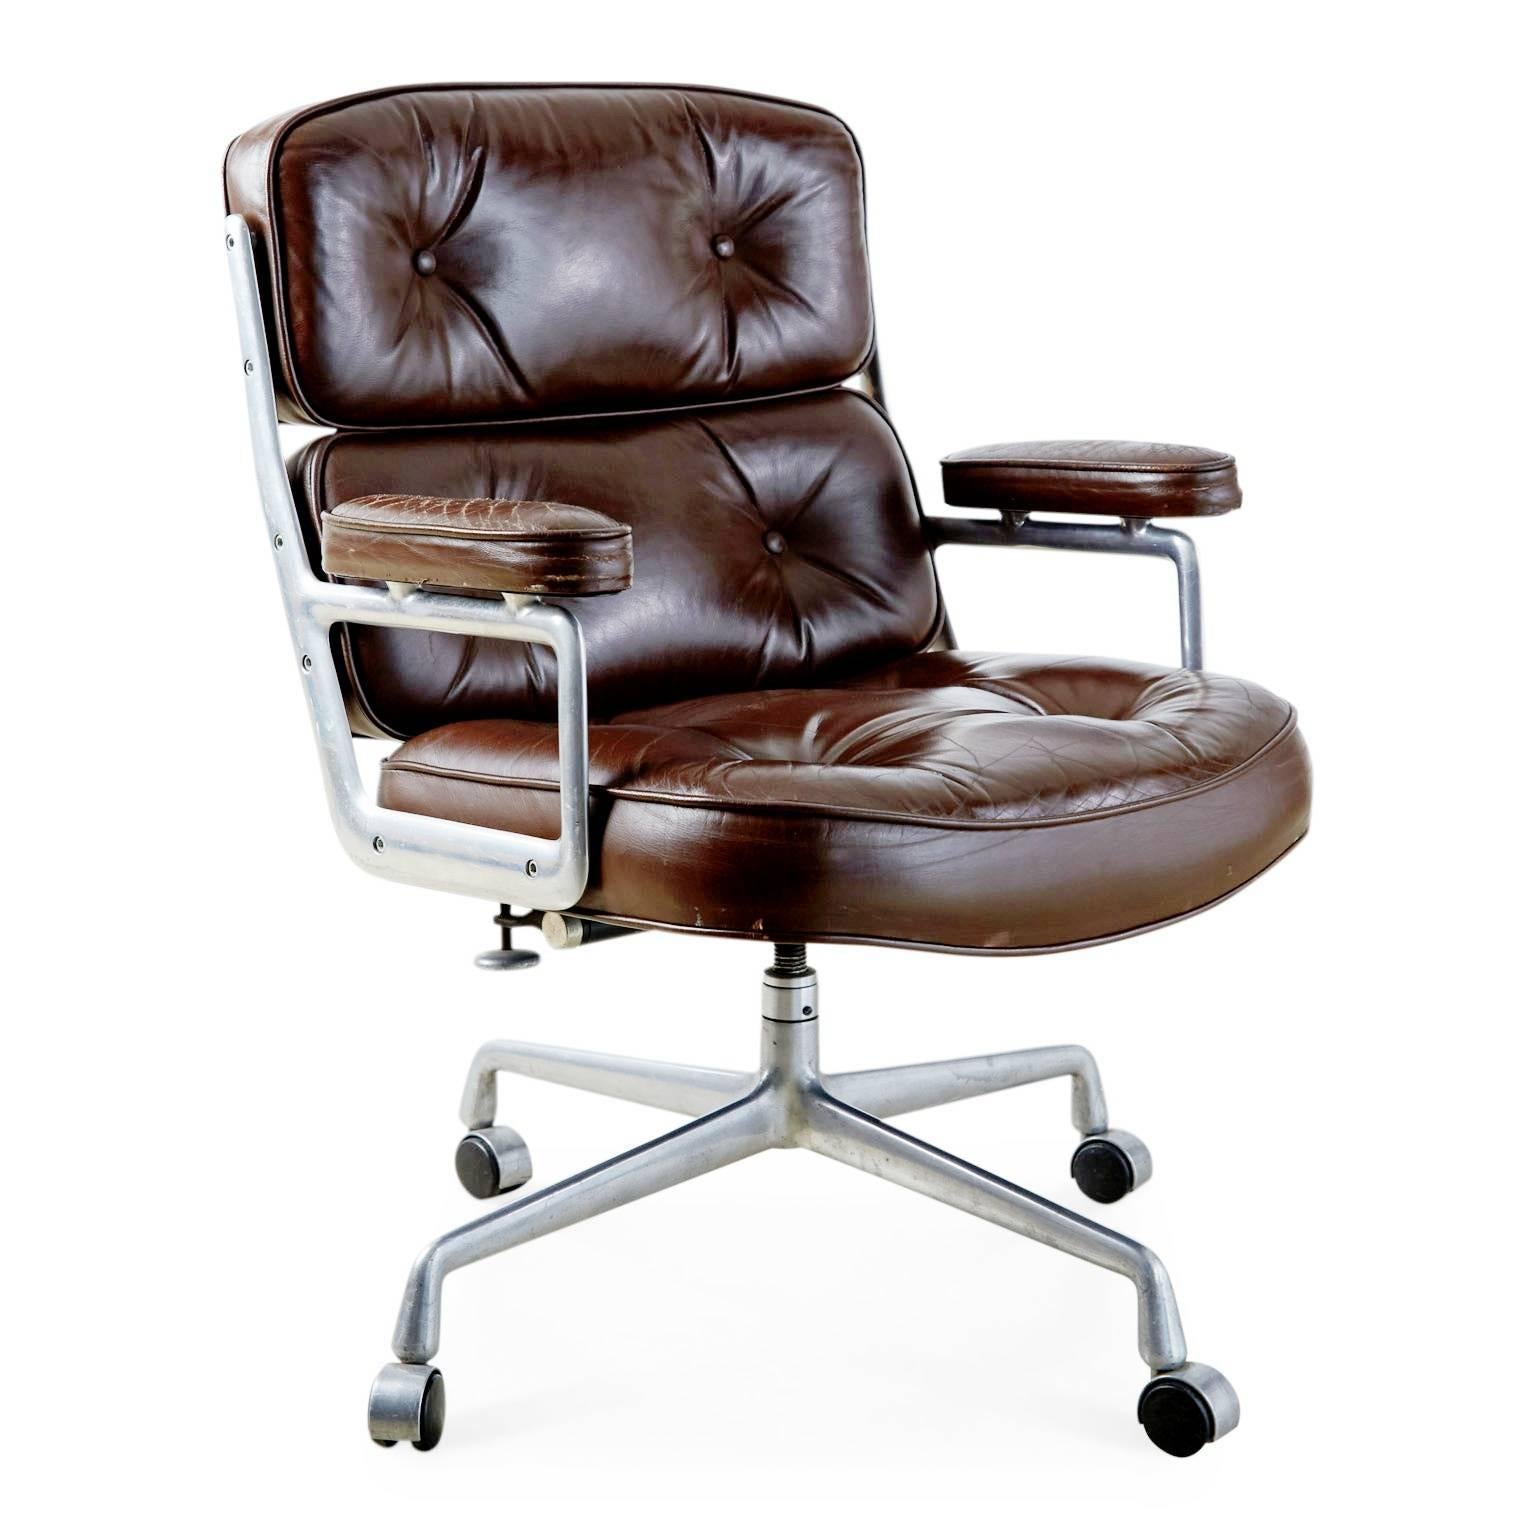 Designed by Charles Eames in 1959 for the Time Life building in New York City, this executive office chair still claims its tenure as the pinnacle of professional style. 

Upholstered in a deep chestnut brown leather that features an admirable